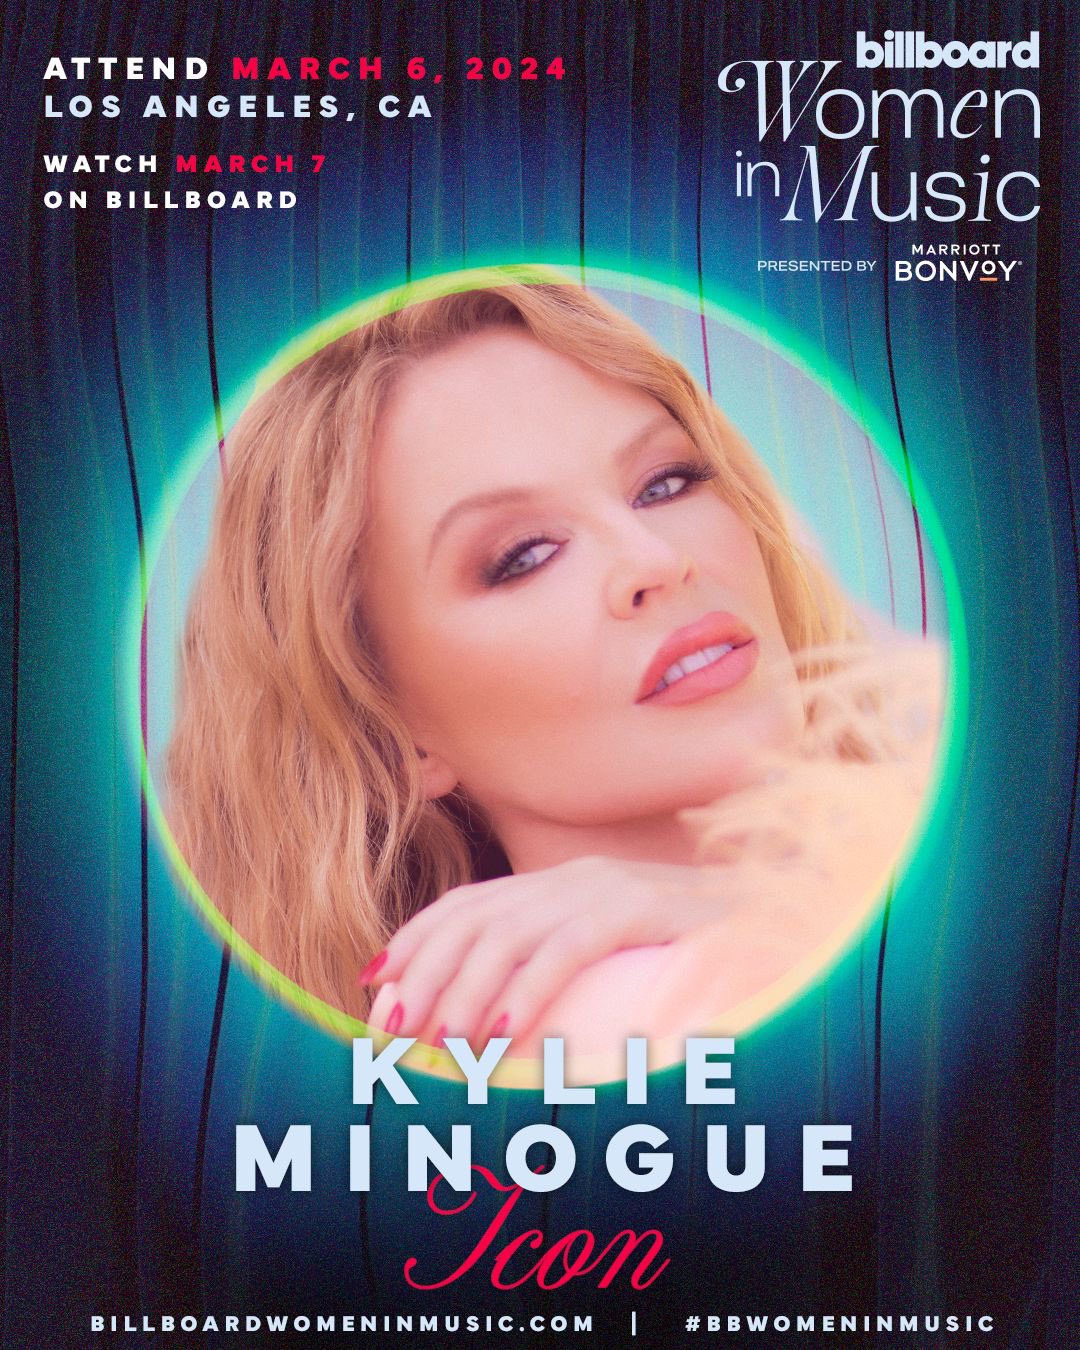 US Kylie Minogue to receive Icon Award at Billboards 2024 Women in Music Awards News on News